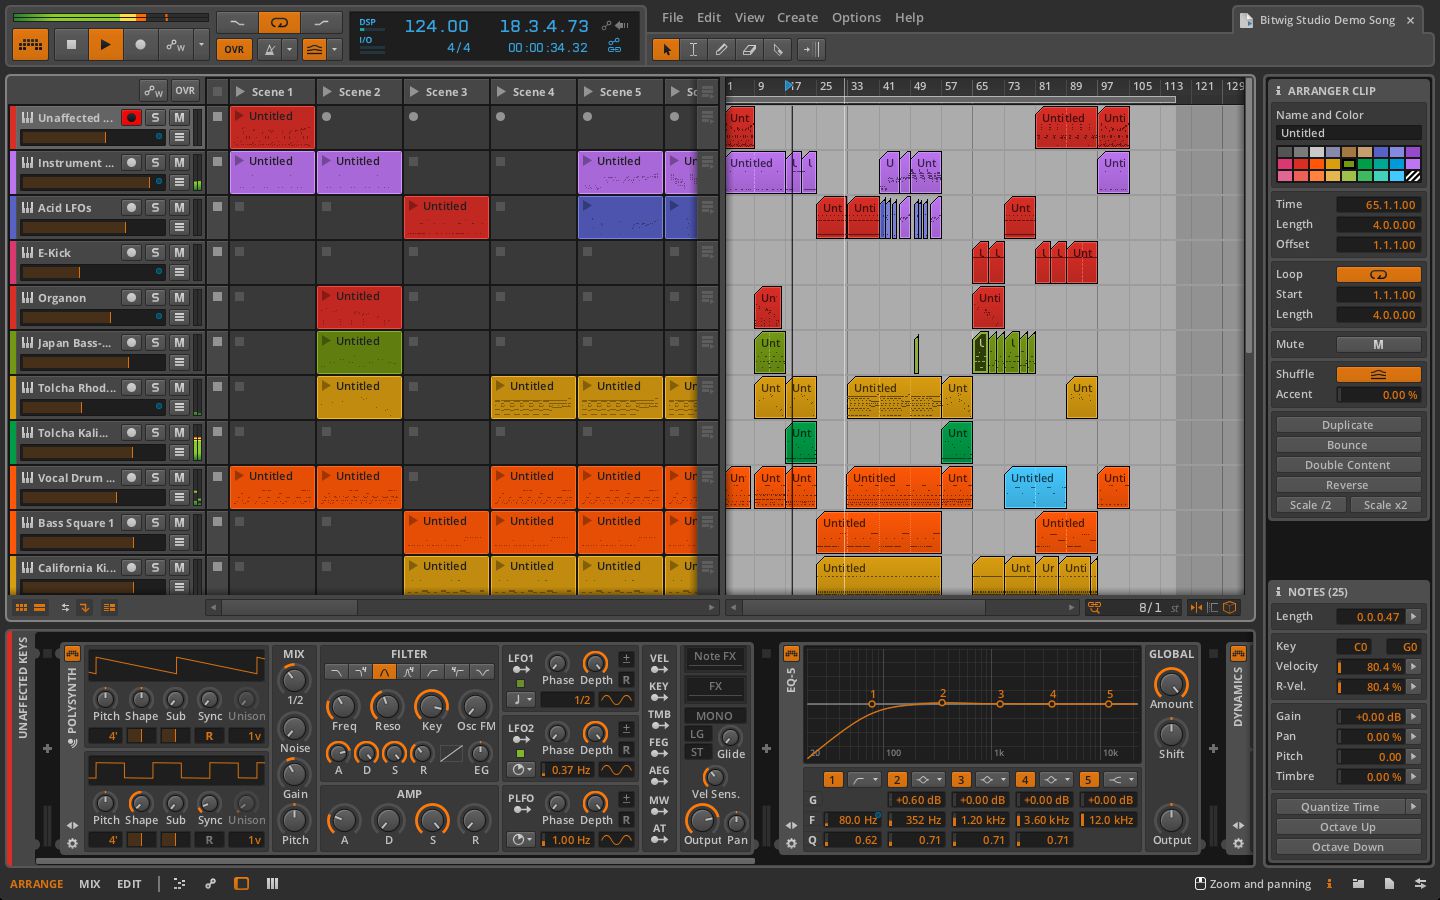 Bitwig 1.0 in all its glory.